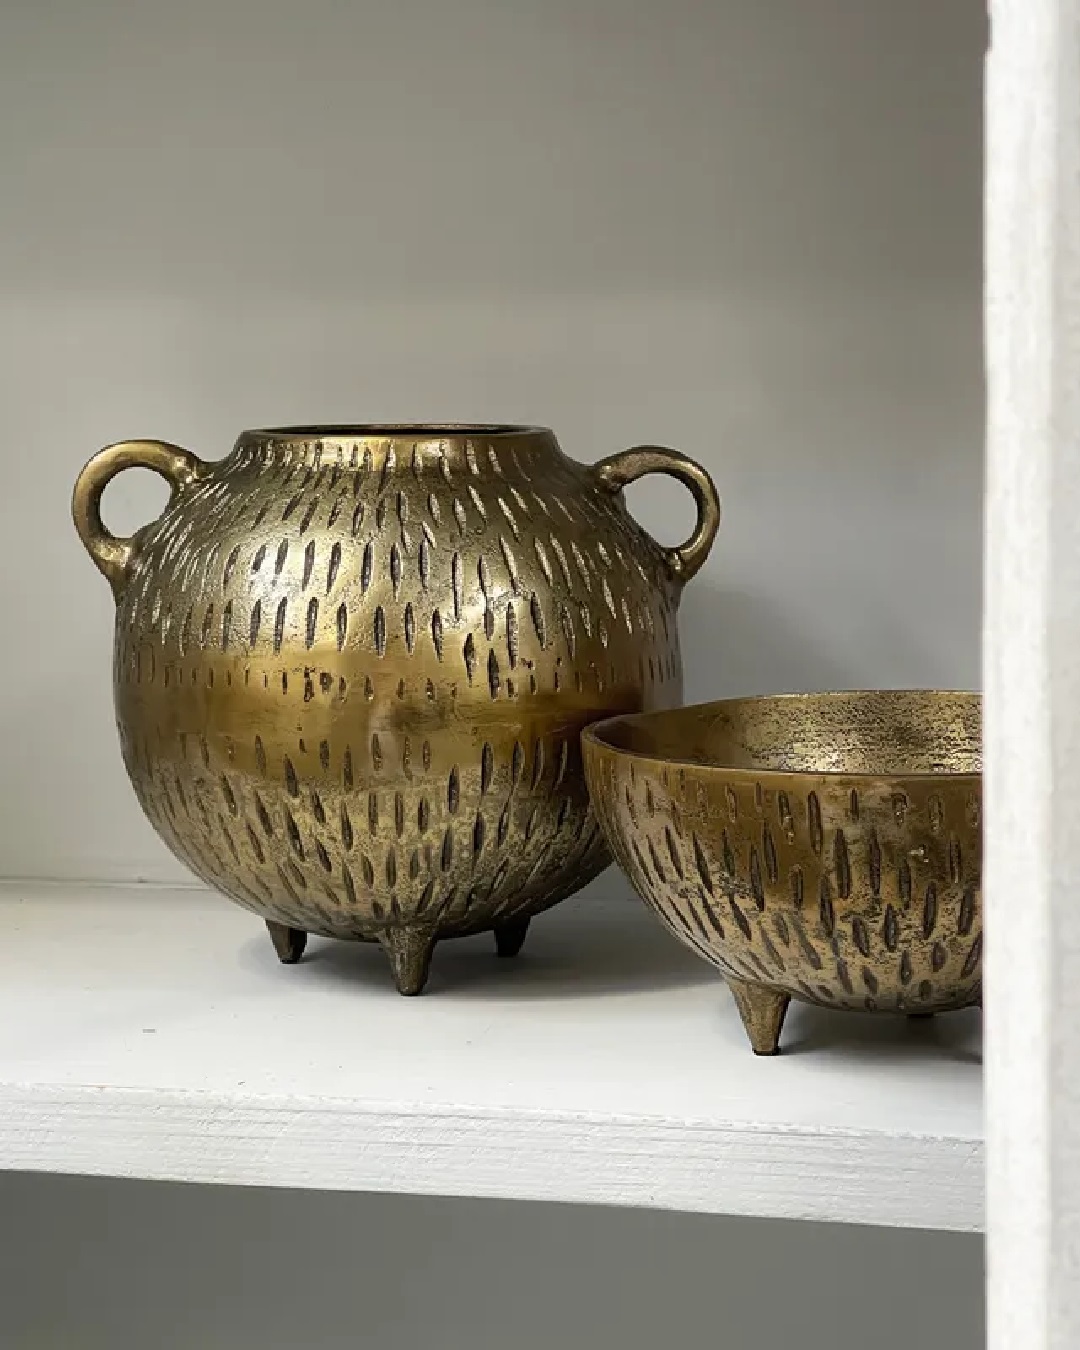 Cairo bowl with handles round gold and small bowl on shelf